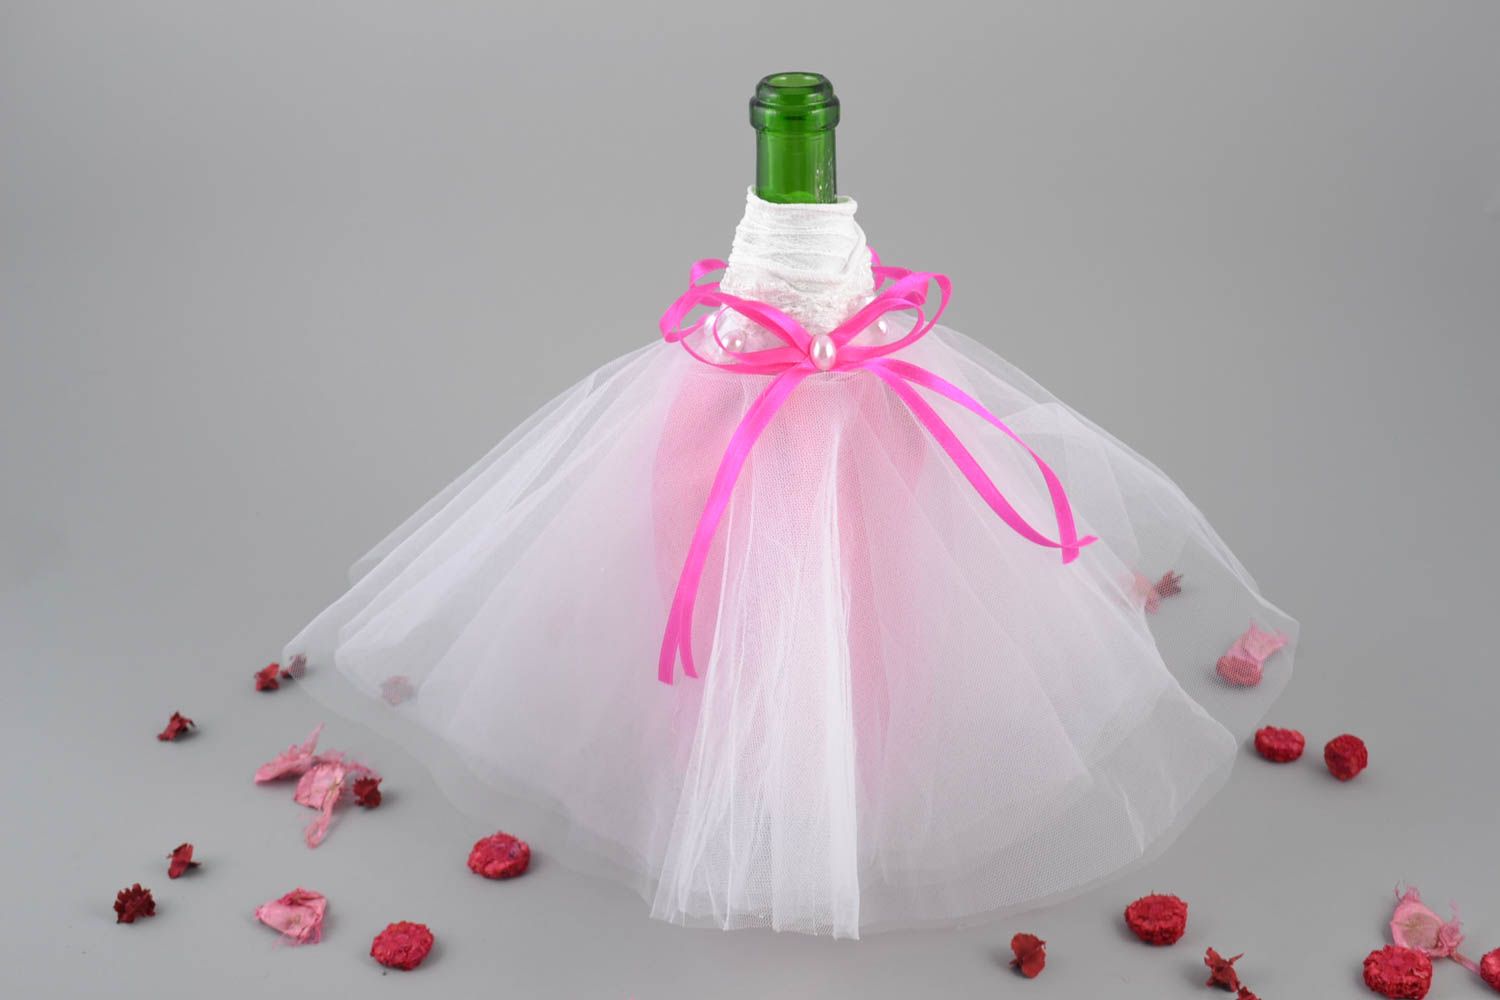 Bride's clothes for bottle of champagne tender wedding accessory in light shades photo 1